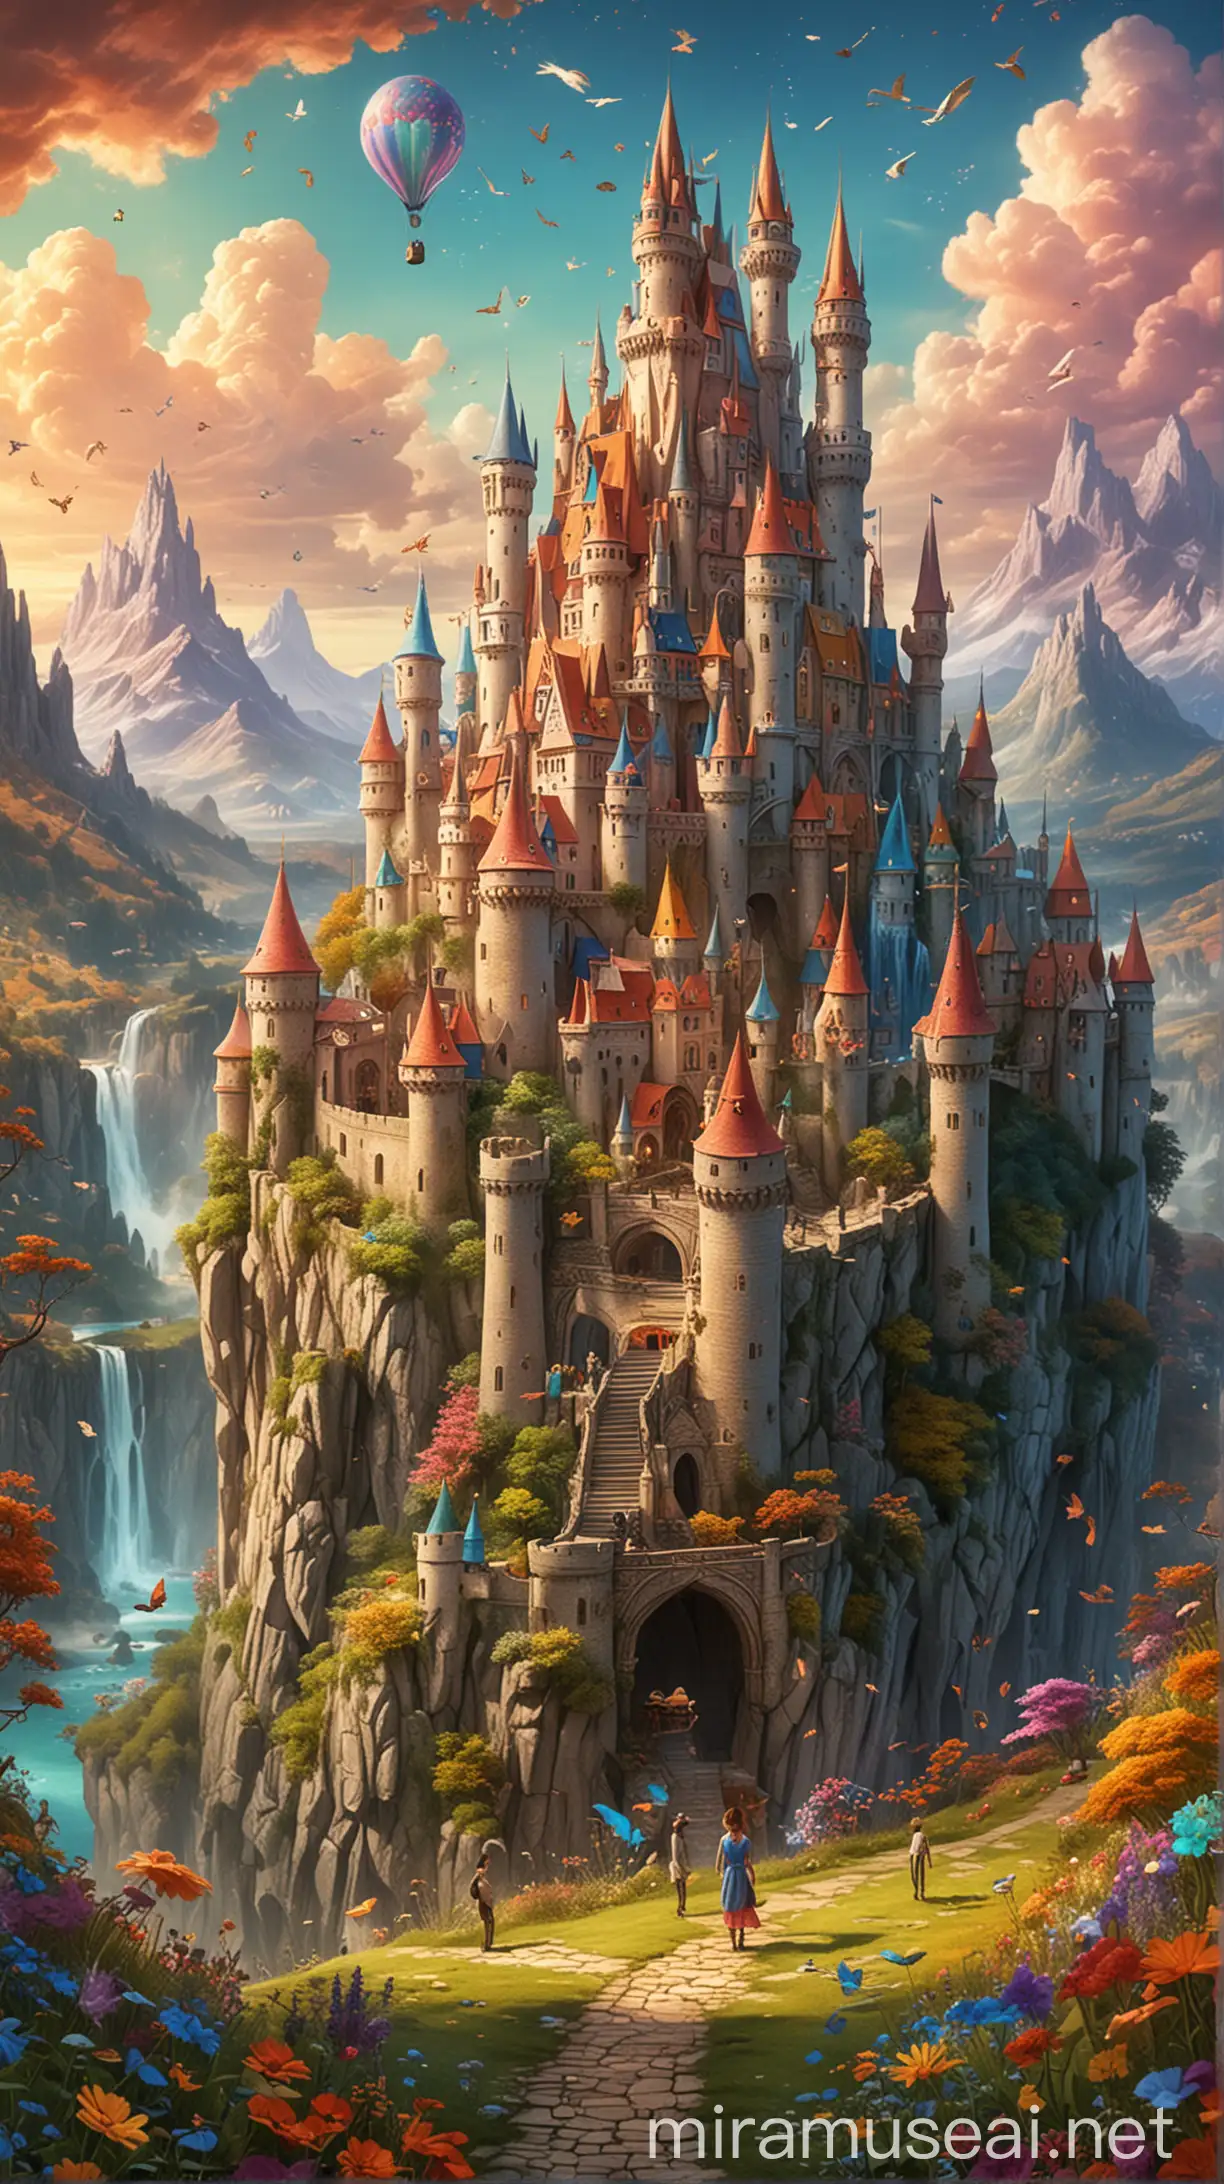 World of Wonder: A whimsical scene depicting a fantastical world filled with vibrant colors, magical creatures, and towering castles, where children's dreams come alive.
 for kids 